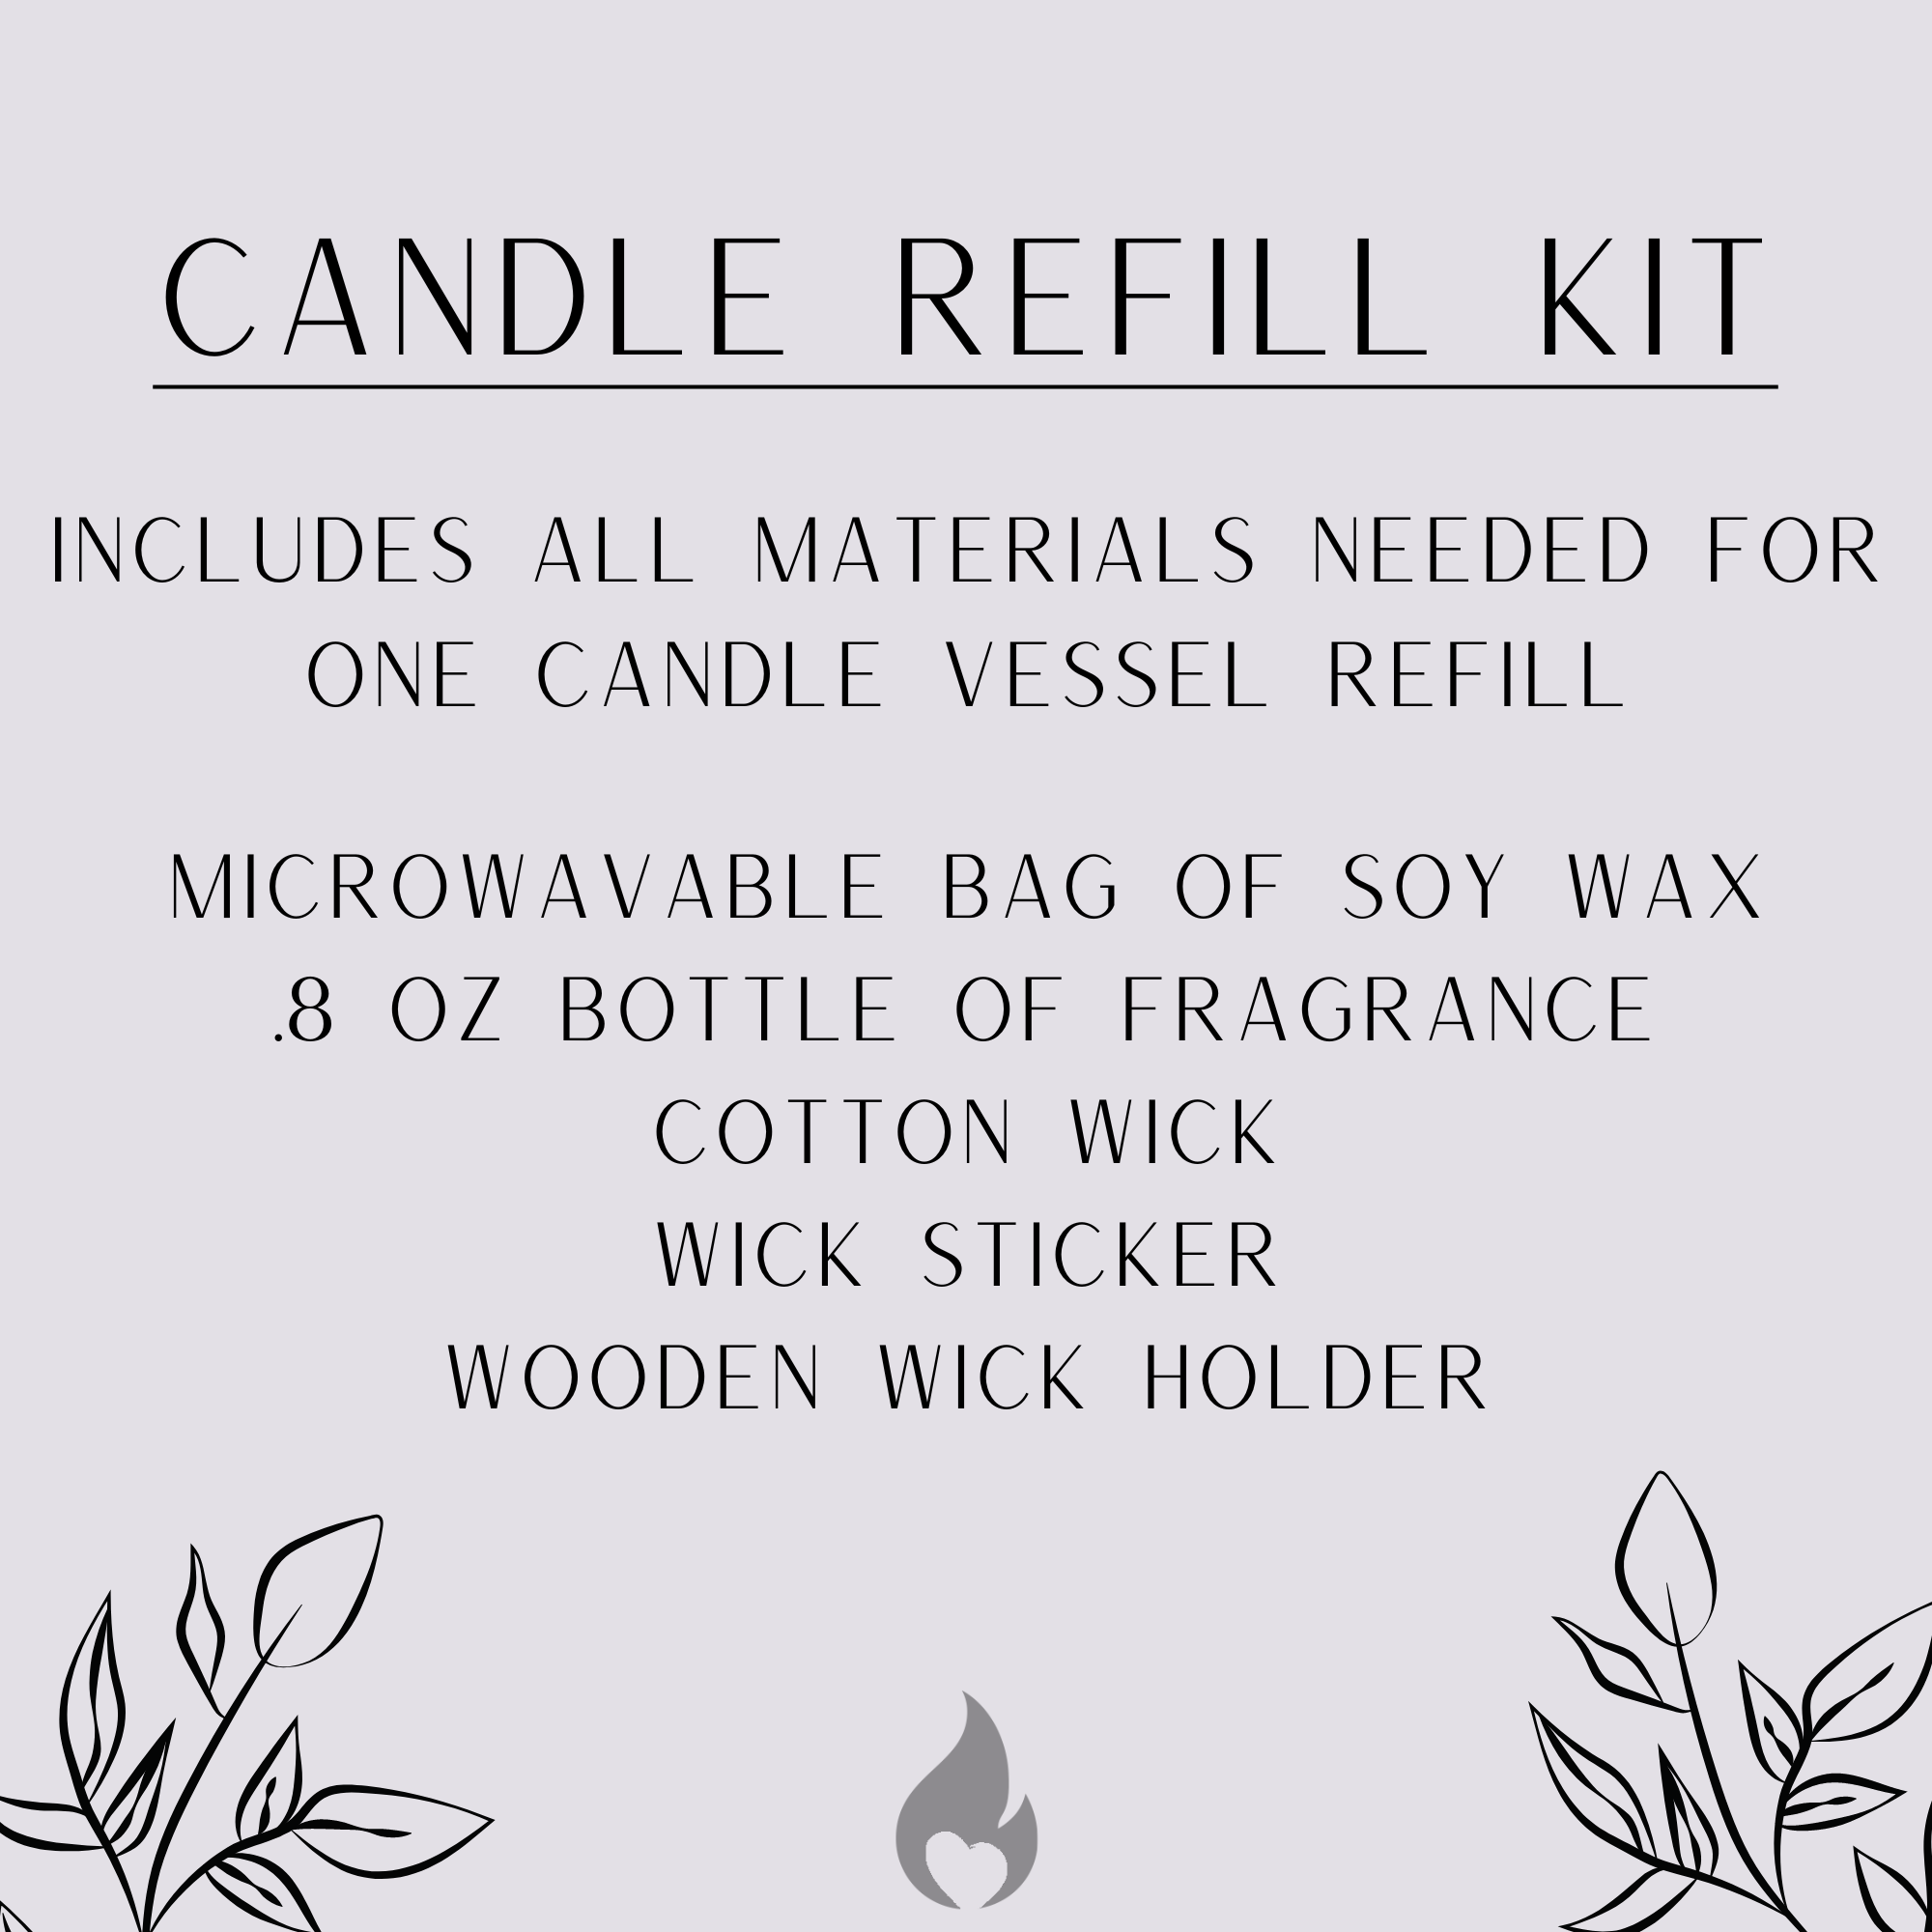 Candle Refill Kit - includes all materials needed for one candle vessel refill, microwavable bag of soy wax .8oz bottle of fragrance, cotton wick, wick sticker, wooden wick holder